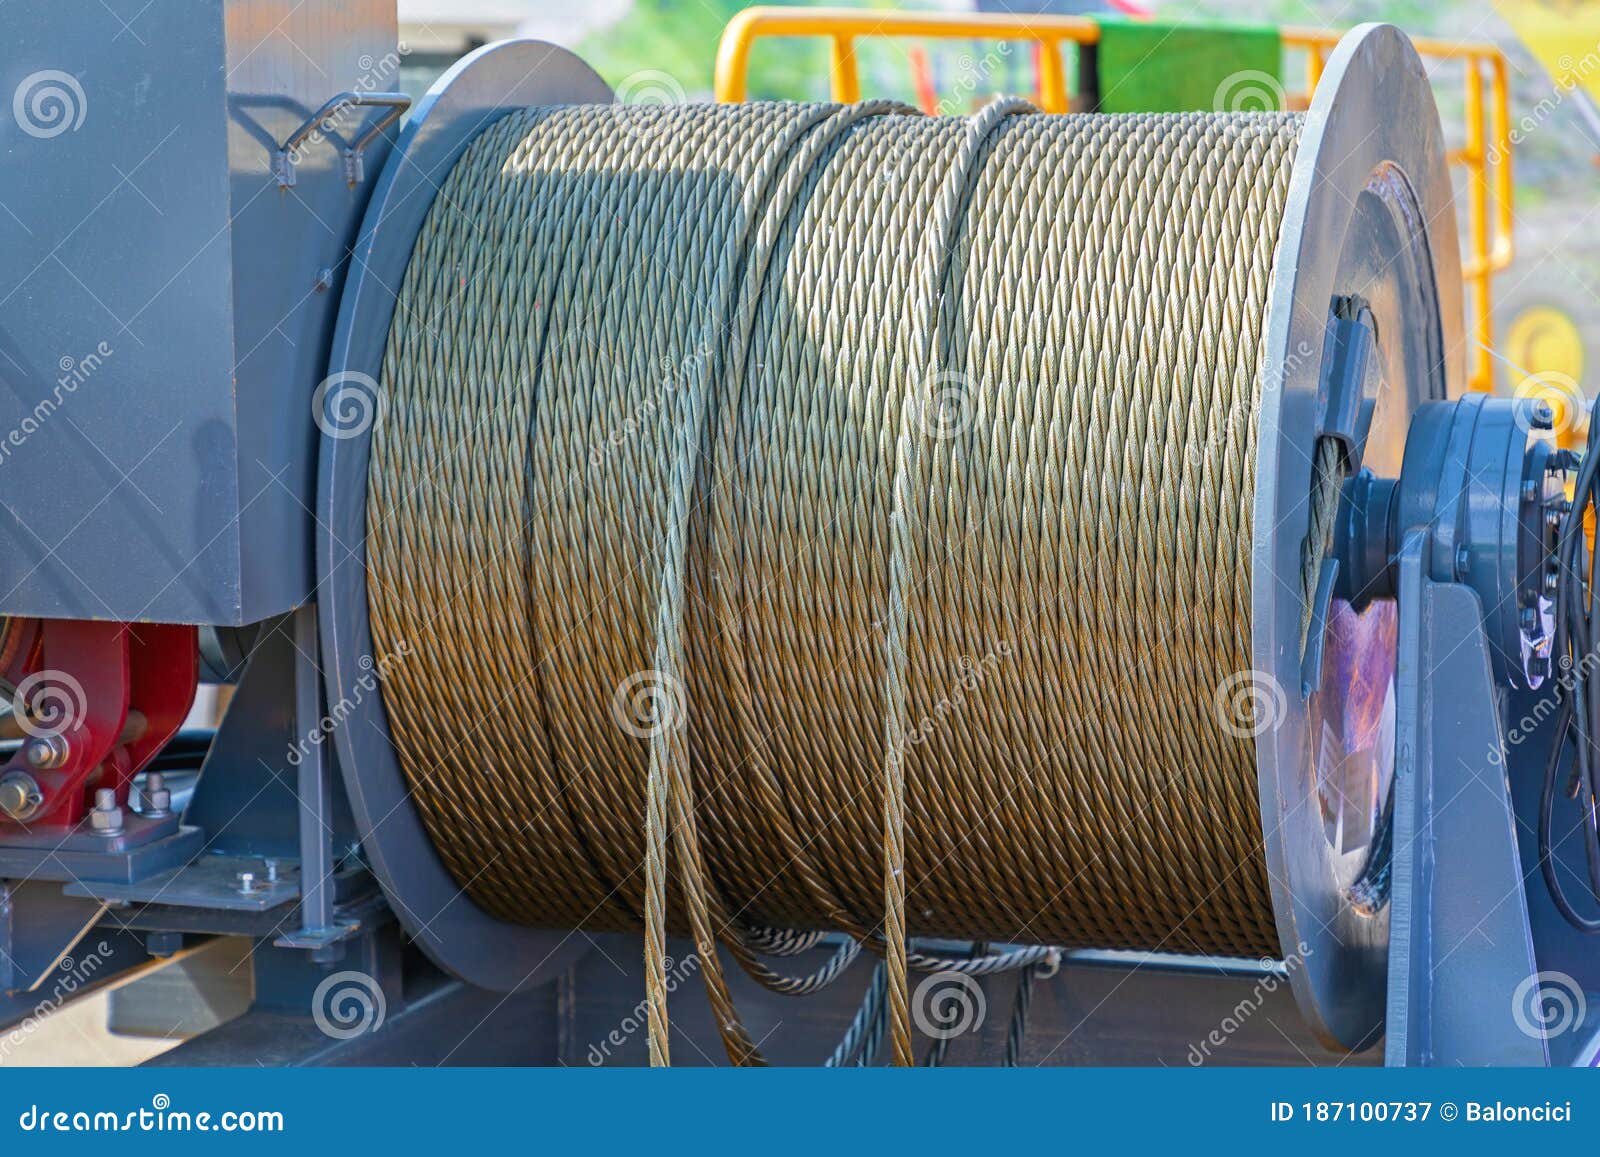 https://thumbs.dreamstime.com/z/crane-wire-spool-cable-reel-construction-187100737.jpg